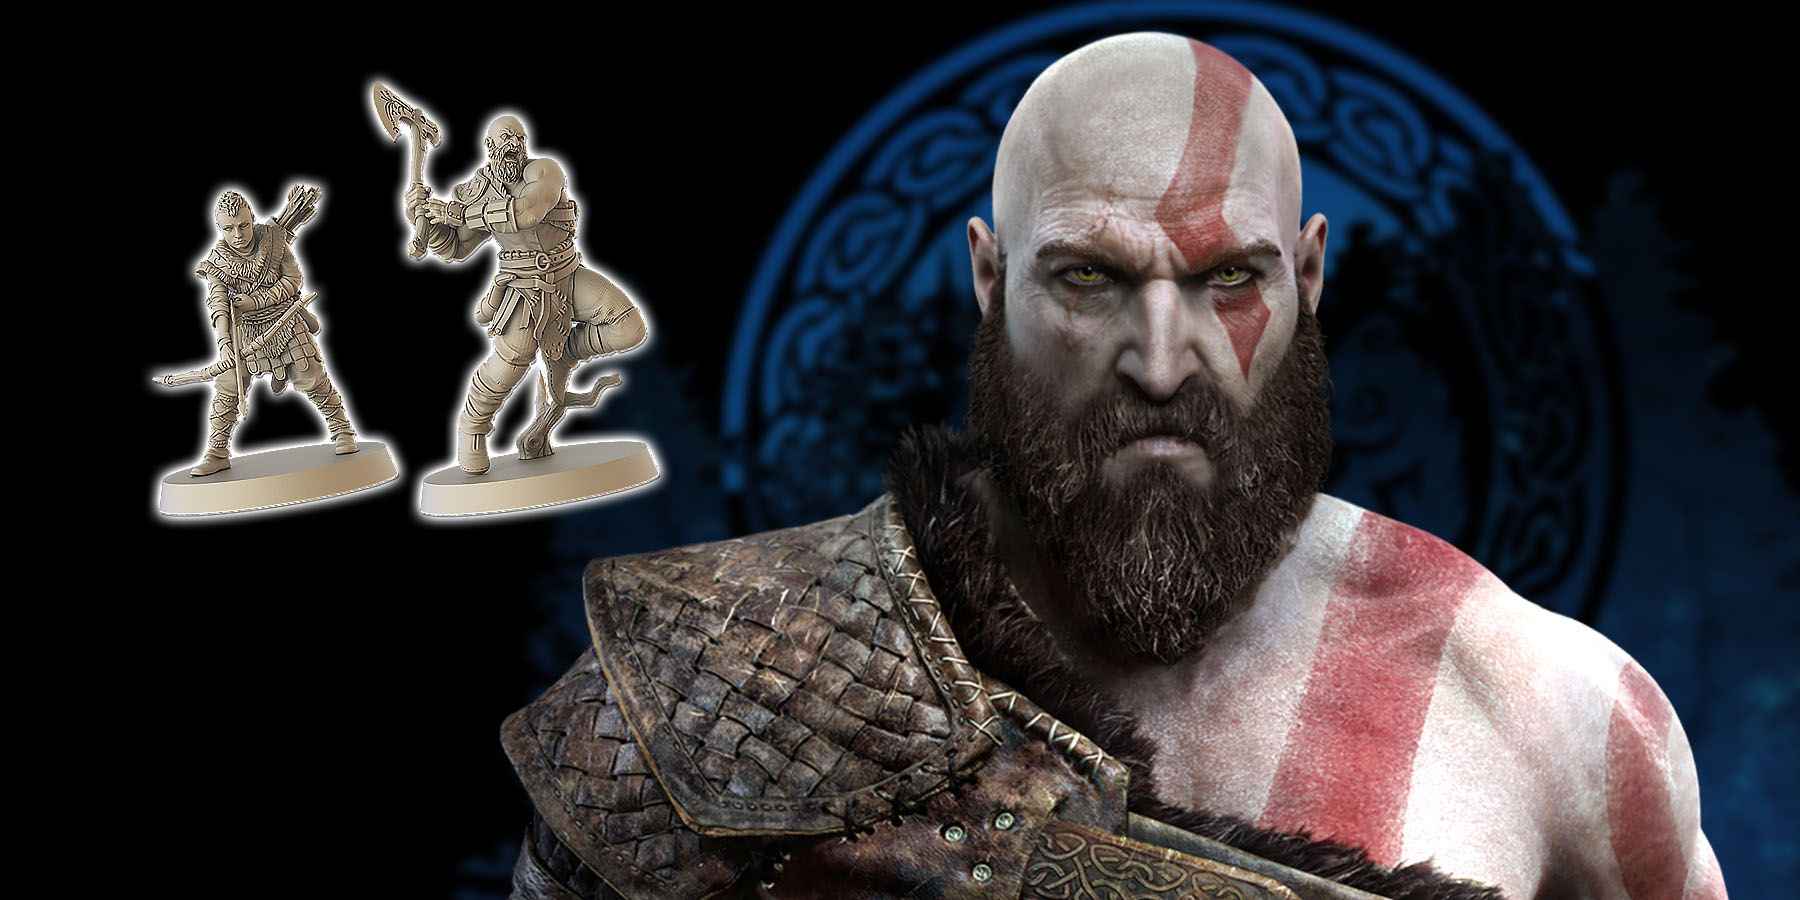 God of War board game pieces against Kratos and a black and blue background